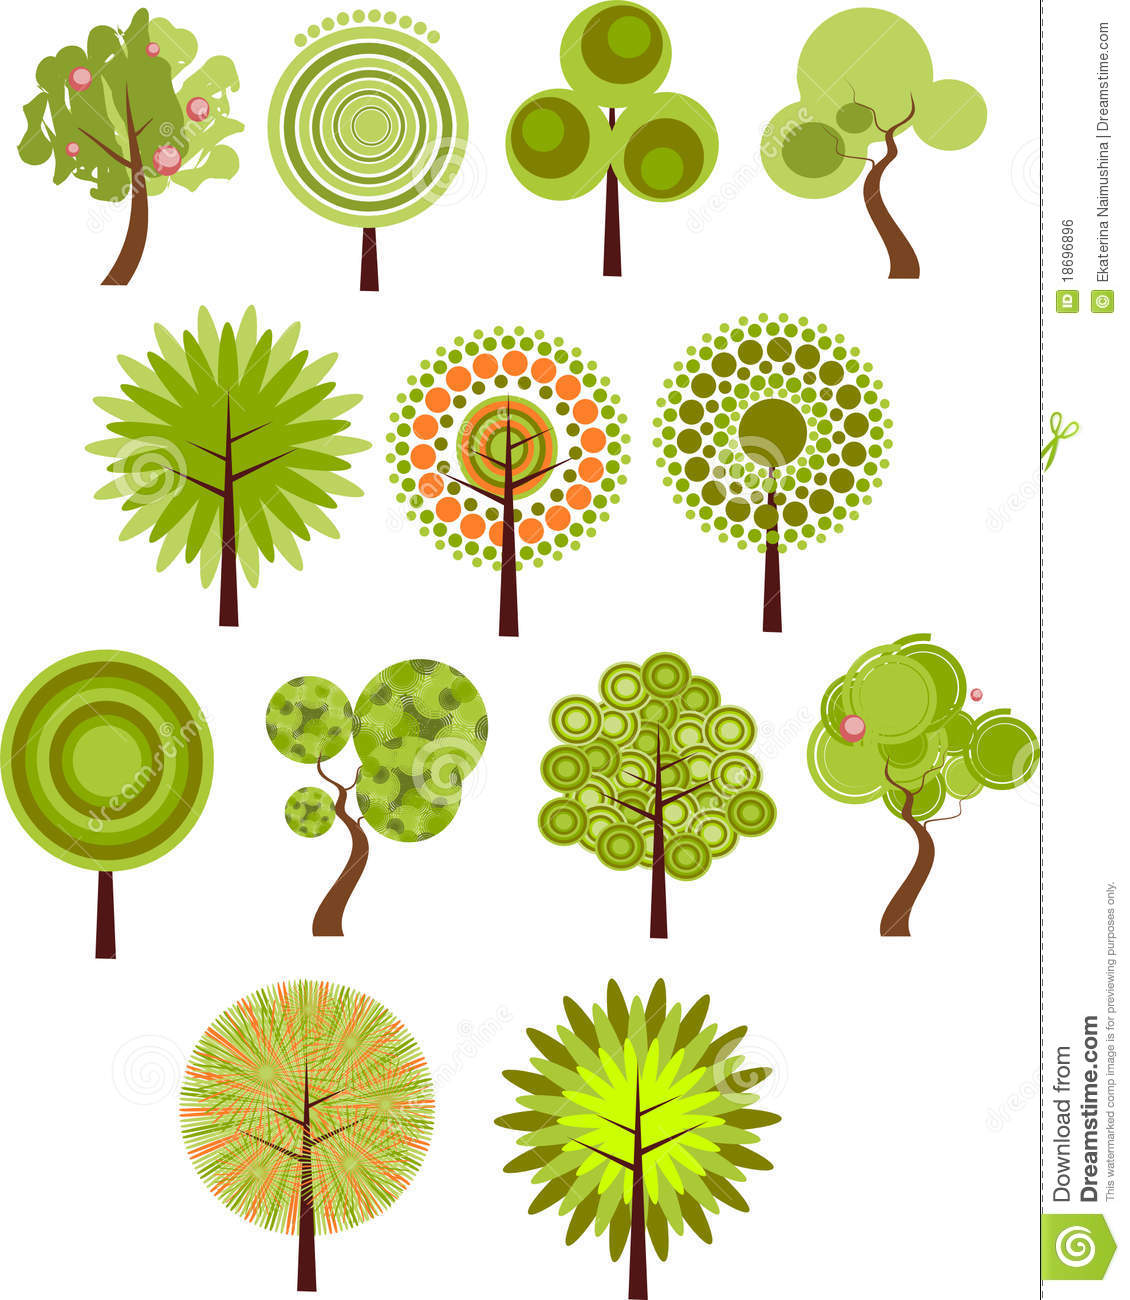 Collection of tree clip art royalty free stock image image